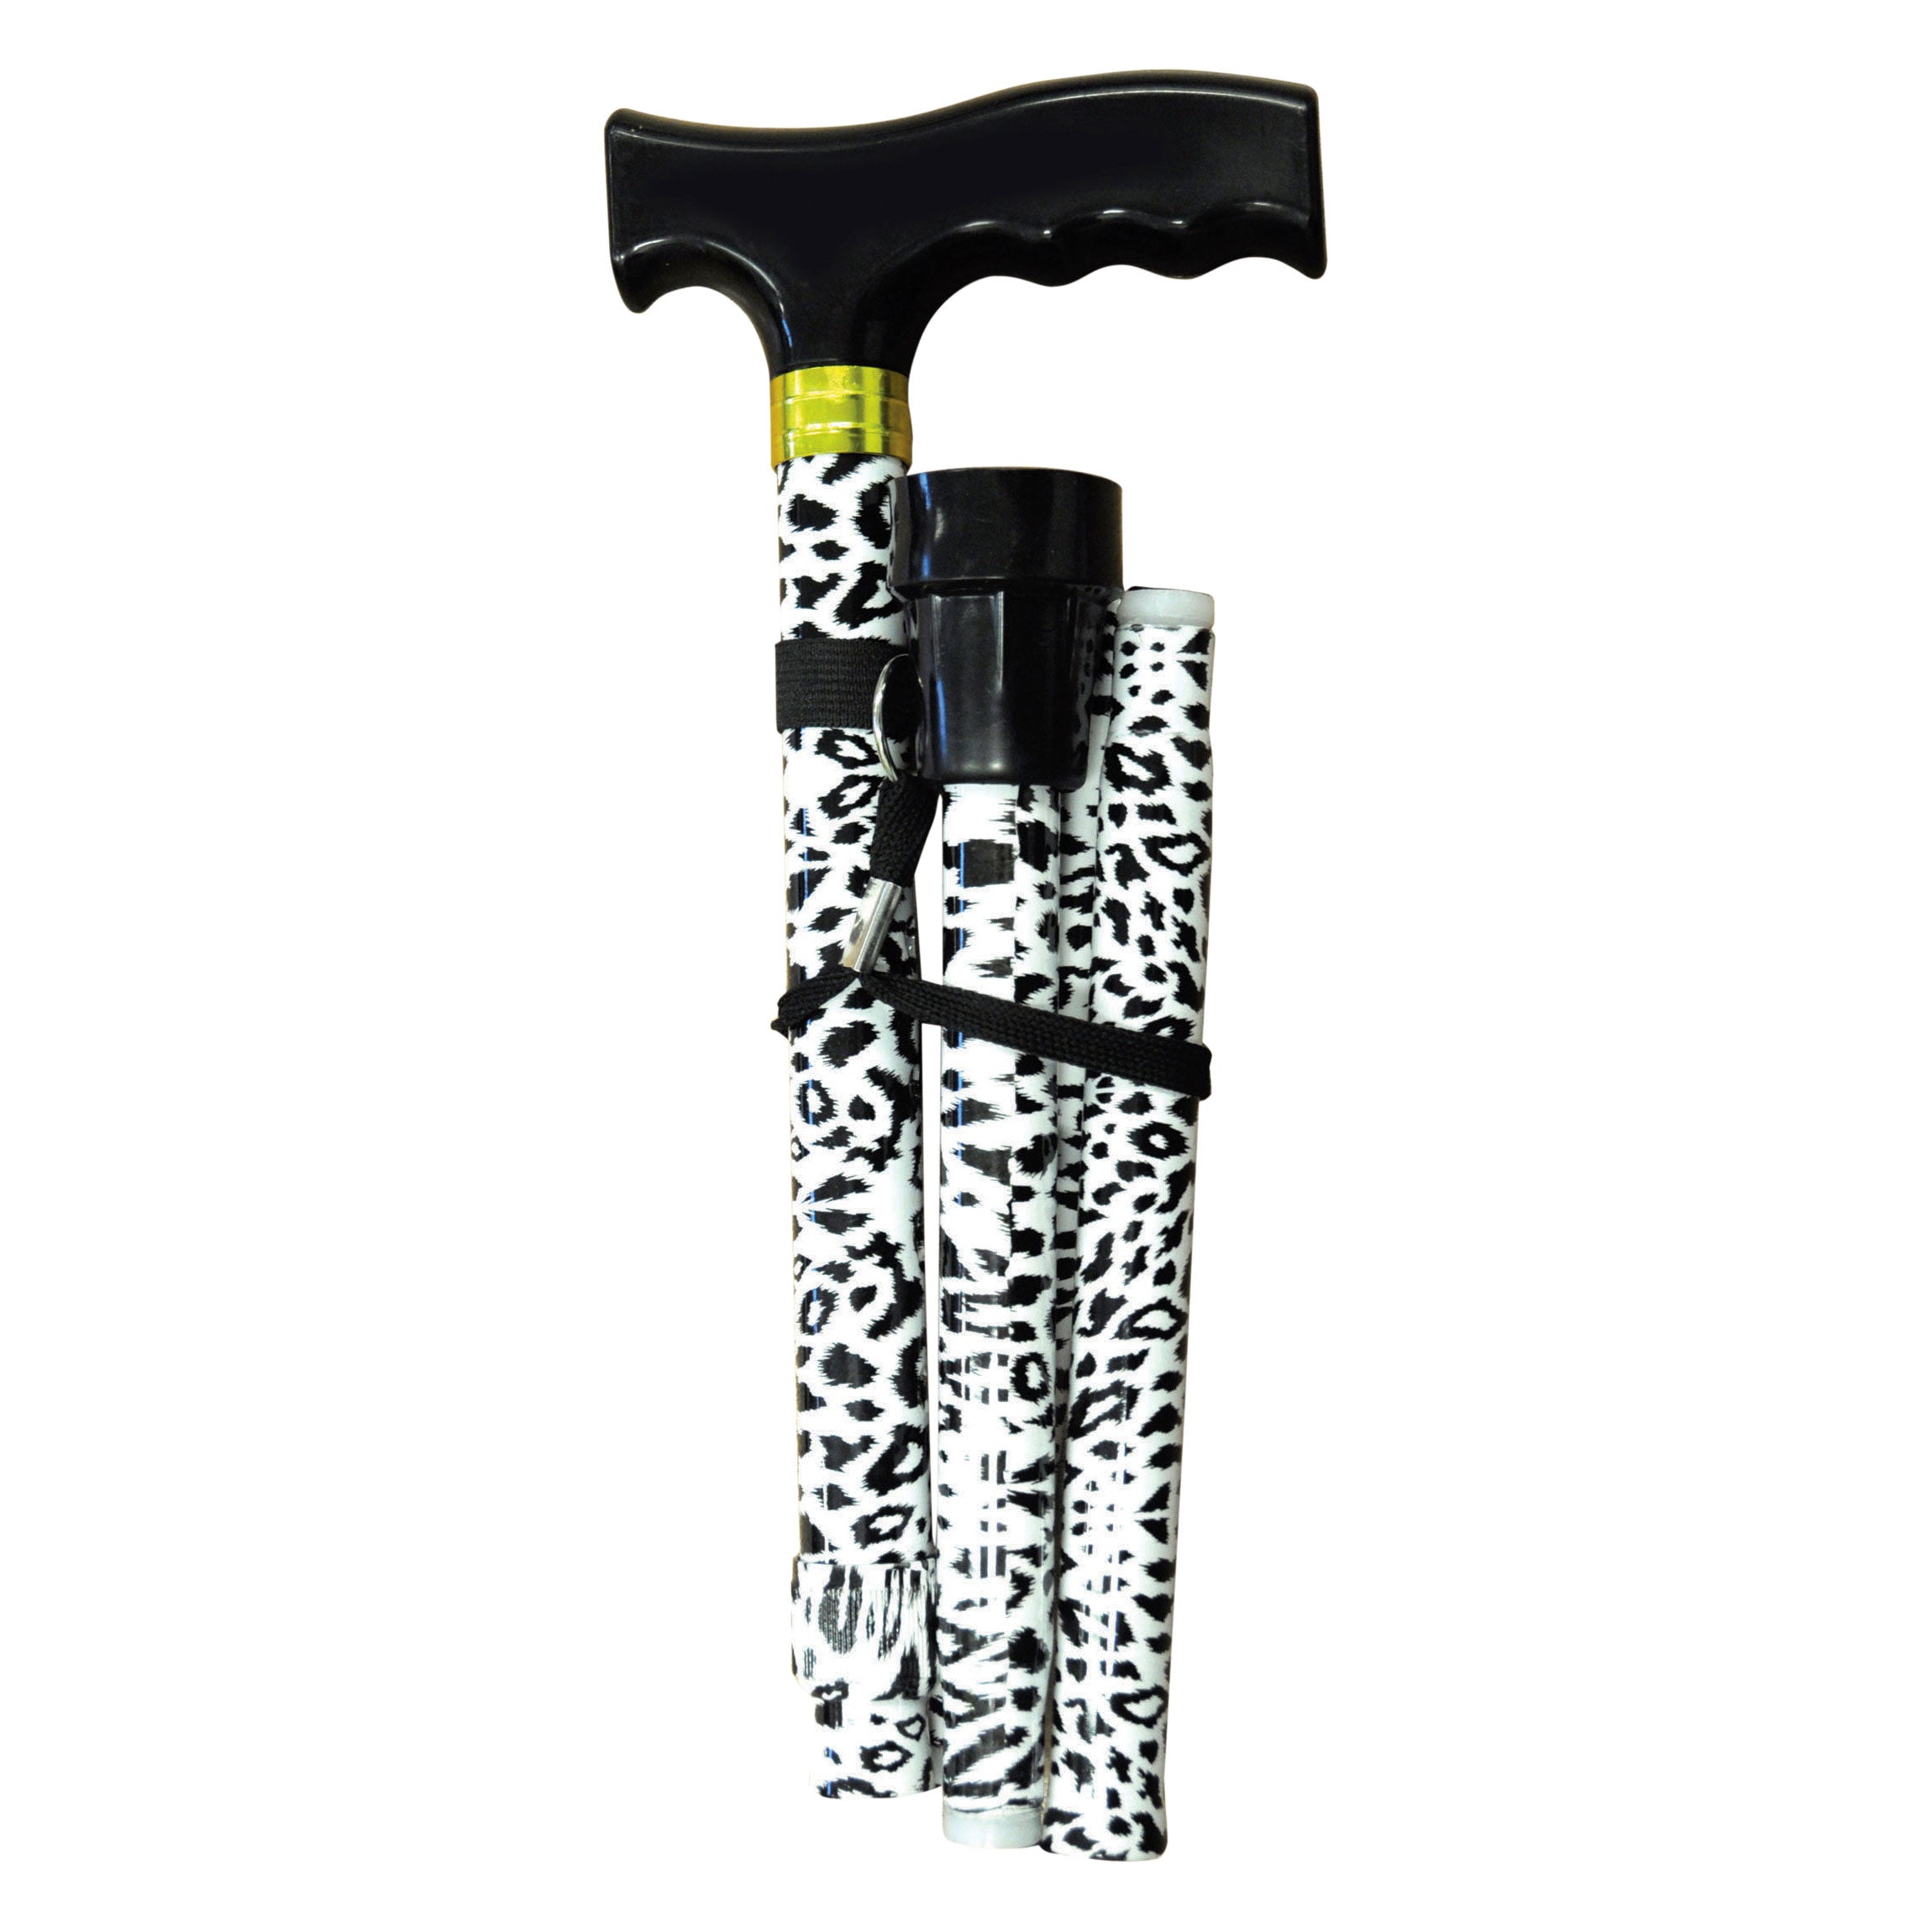 Extendable Plastic Handled Patterned Walking Stick C2c_location_Select Pattern Aids 4 Mobility Black White YES (VAT Exempt)